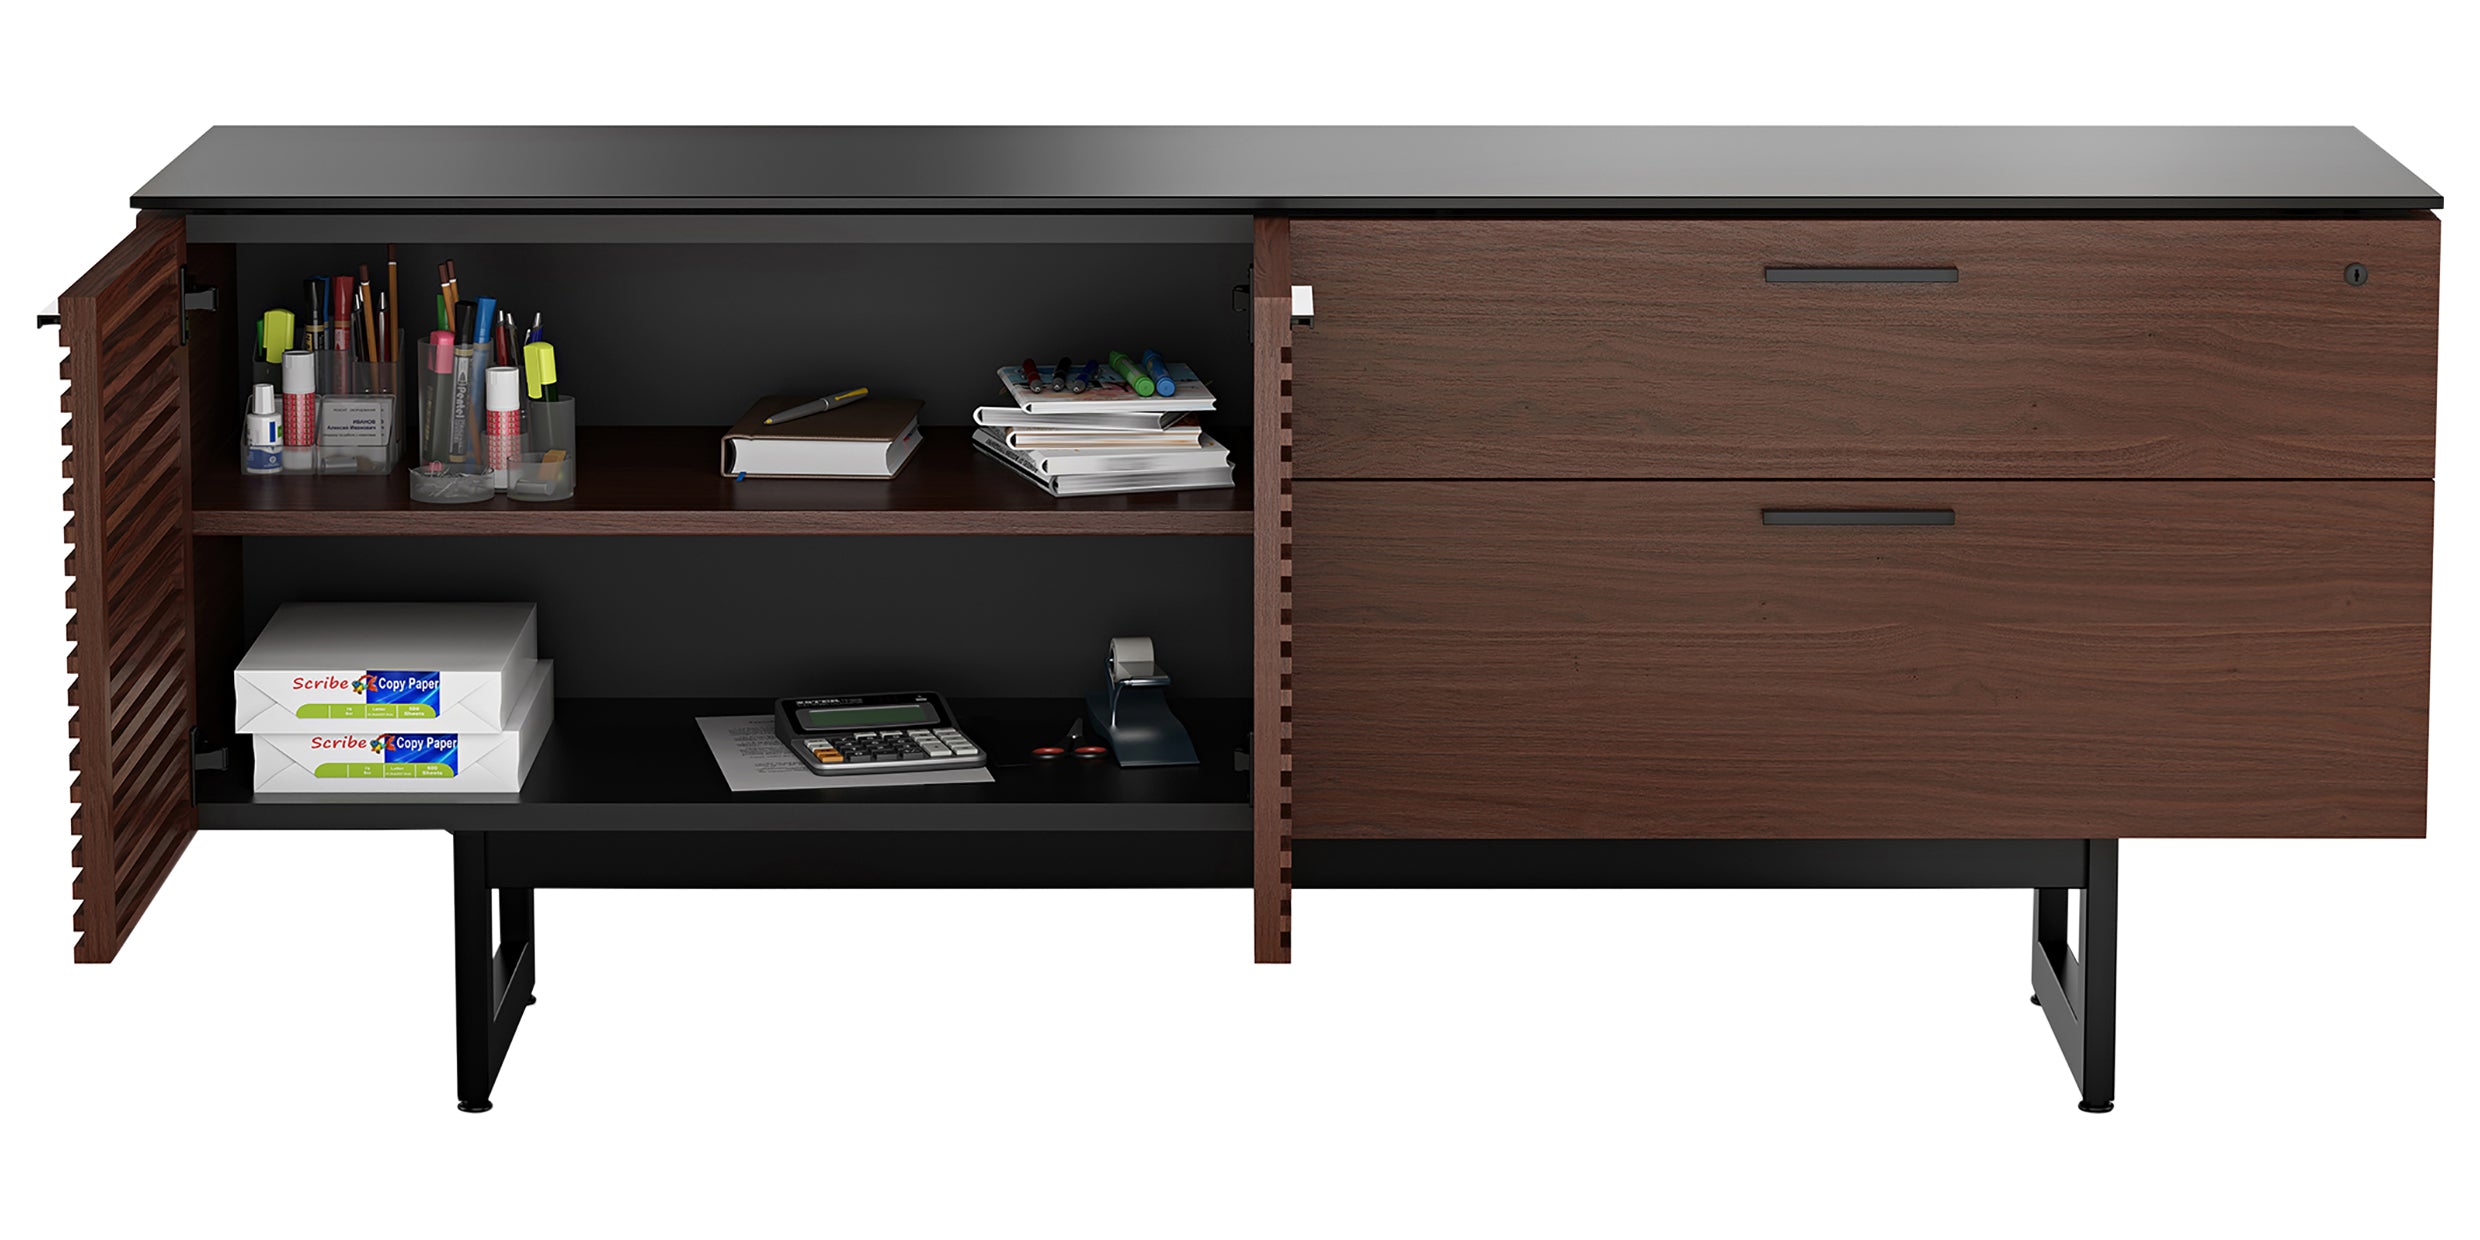 Chocolate Stained Walnut &amp; Chocolate Walnut Veneer with Black Satin-Etched Glass &amp; Black Steel | BDI Corridor Office Credenza | Valley Ridge Furniture